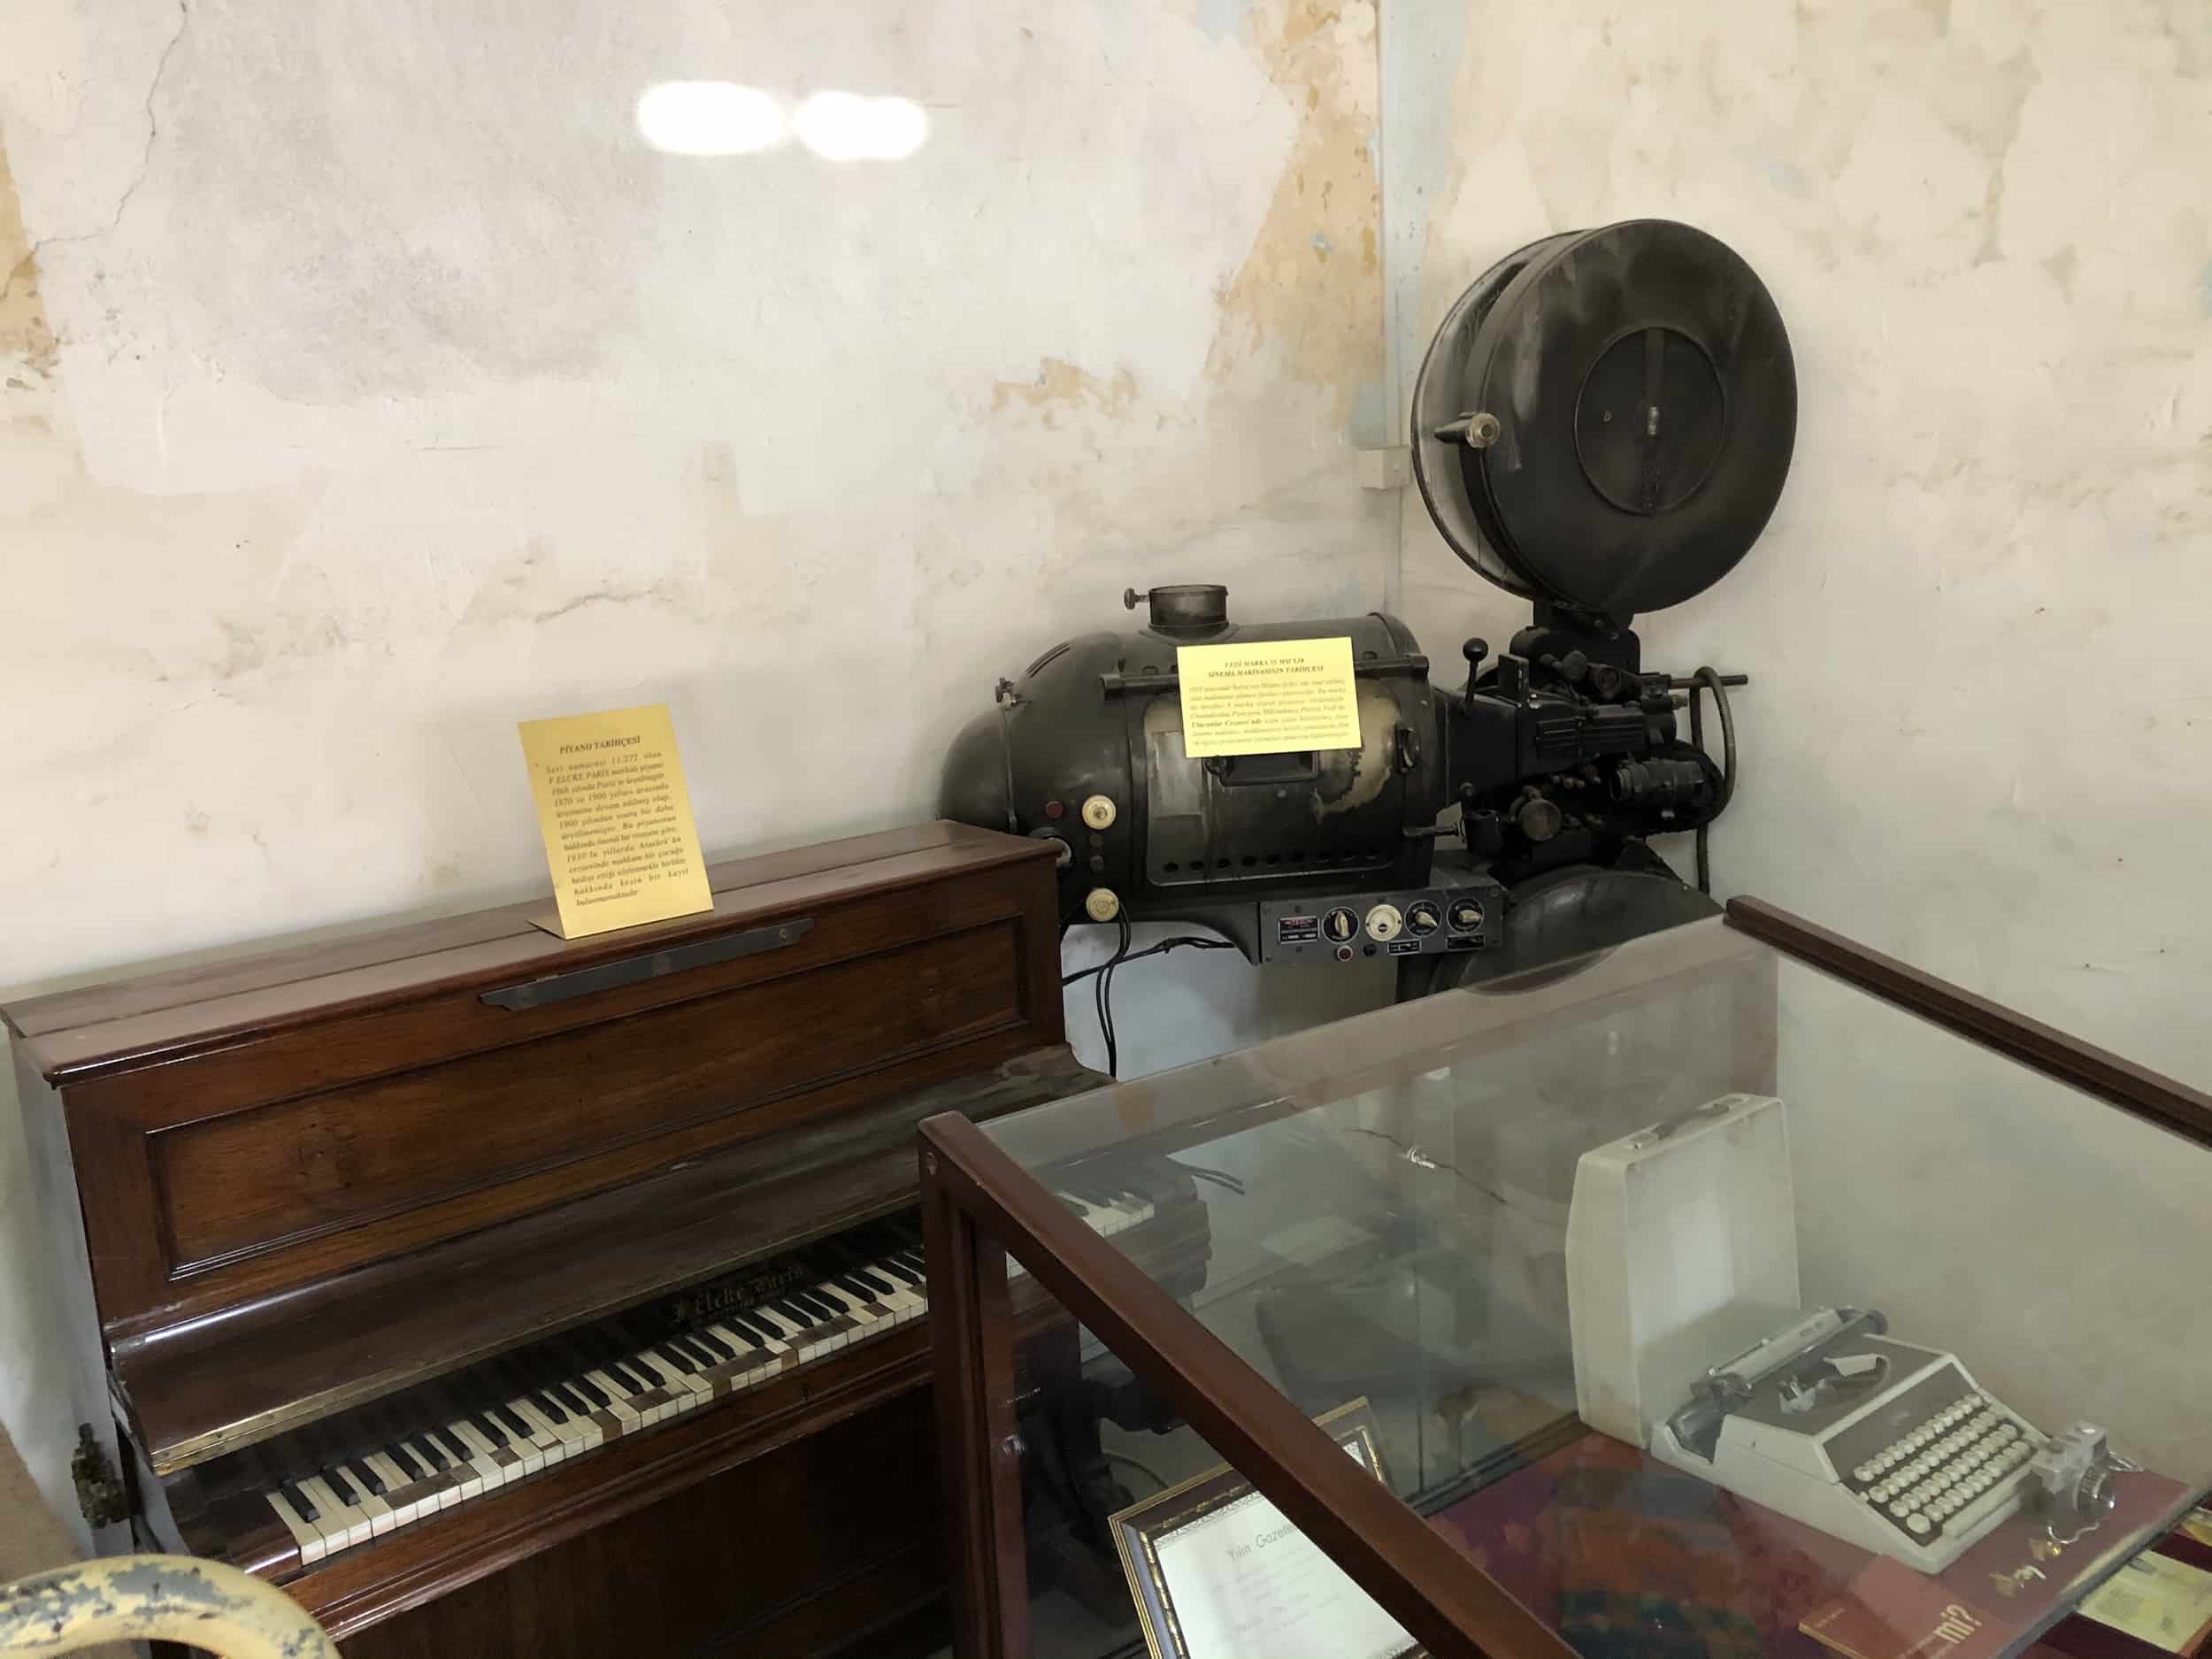 Piano (left) and film projector (right) in the 6th Ward